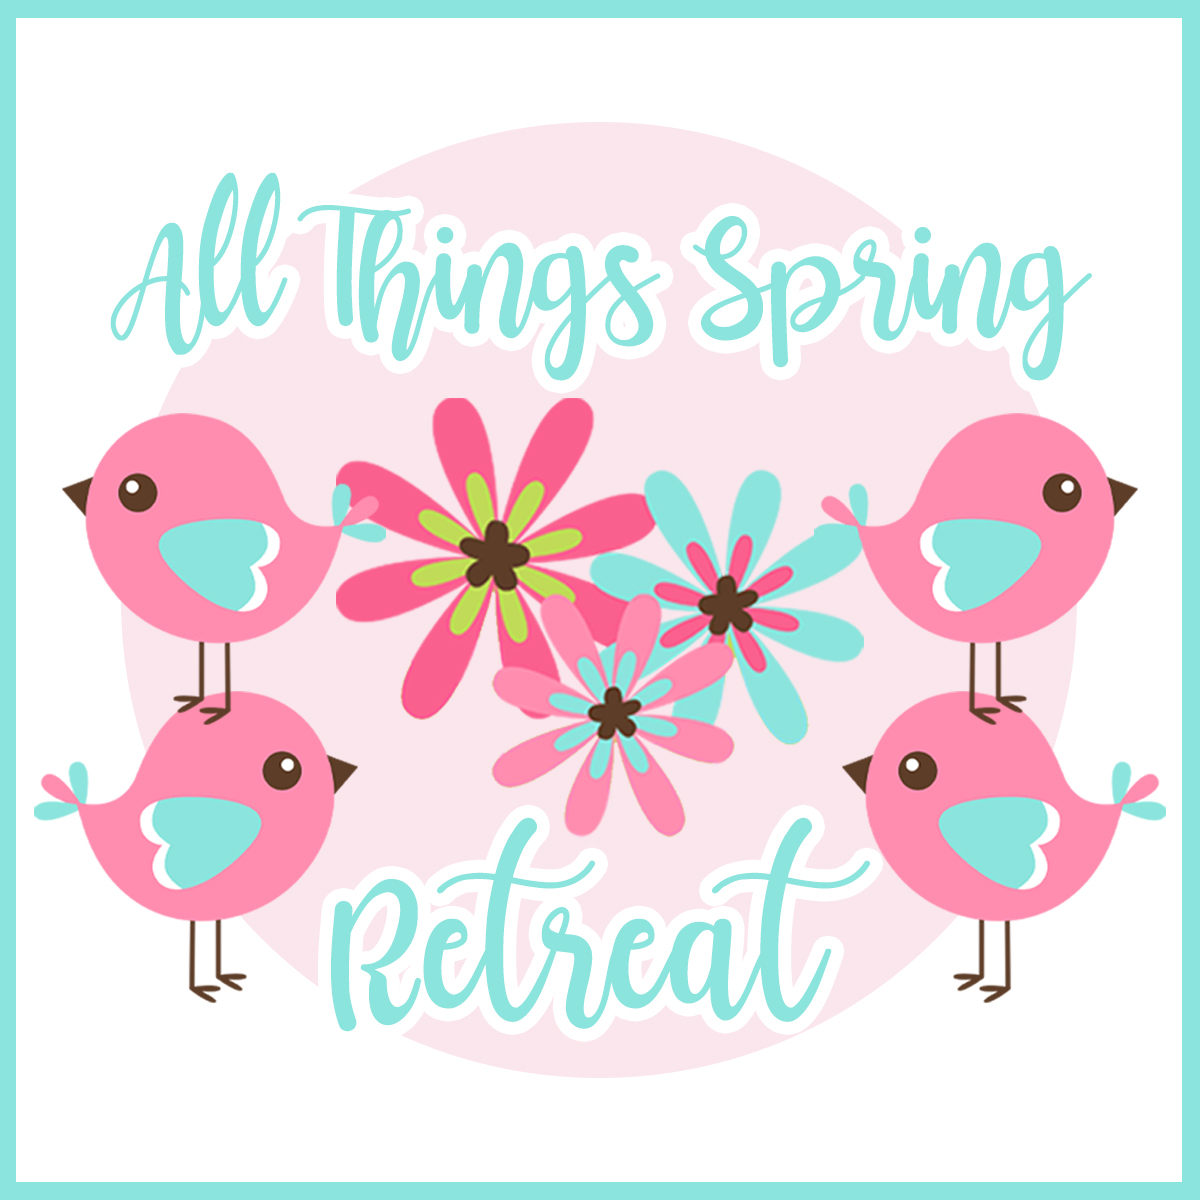 All Things Spring Retreat 